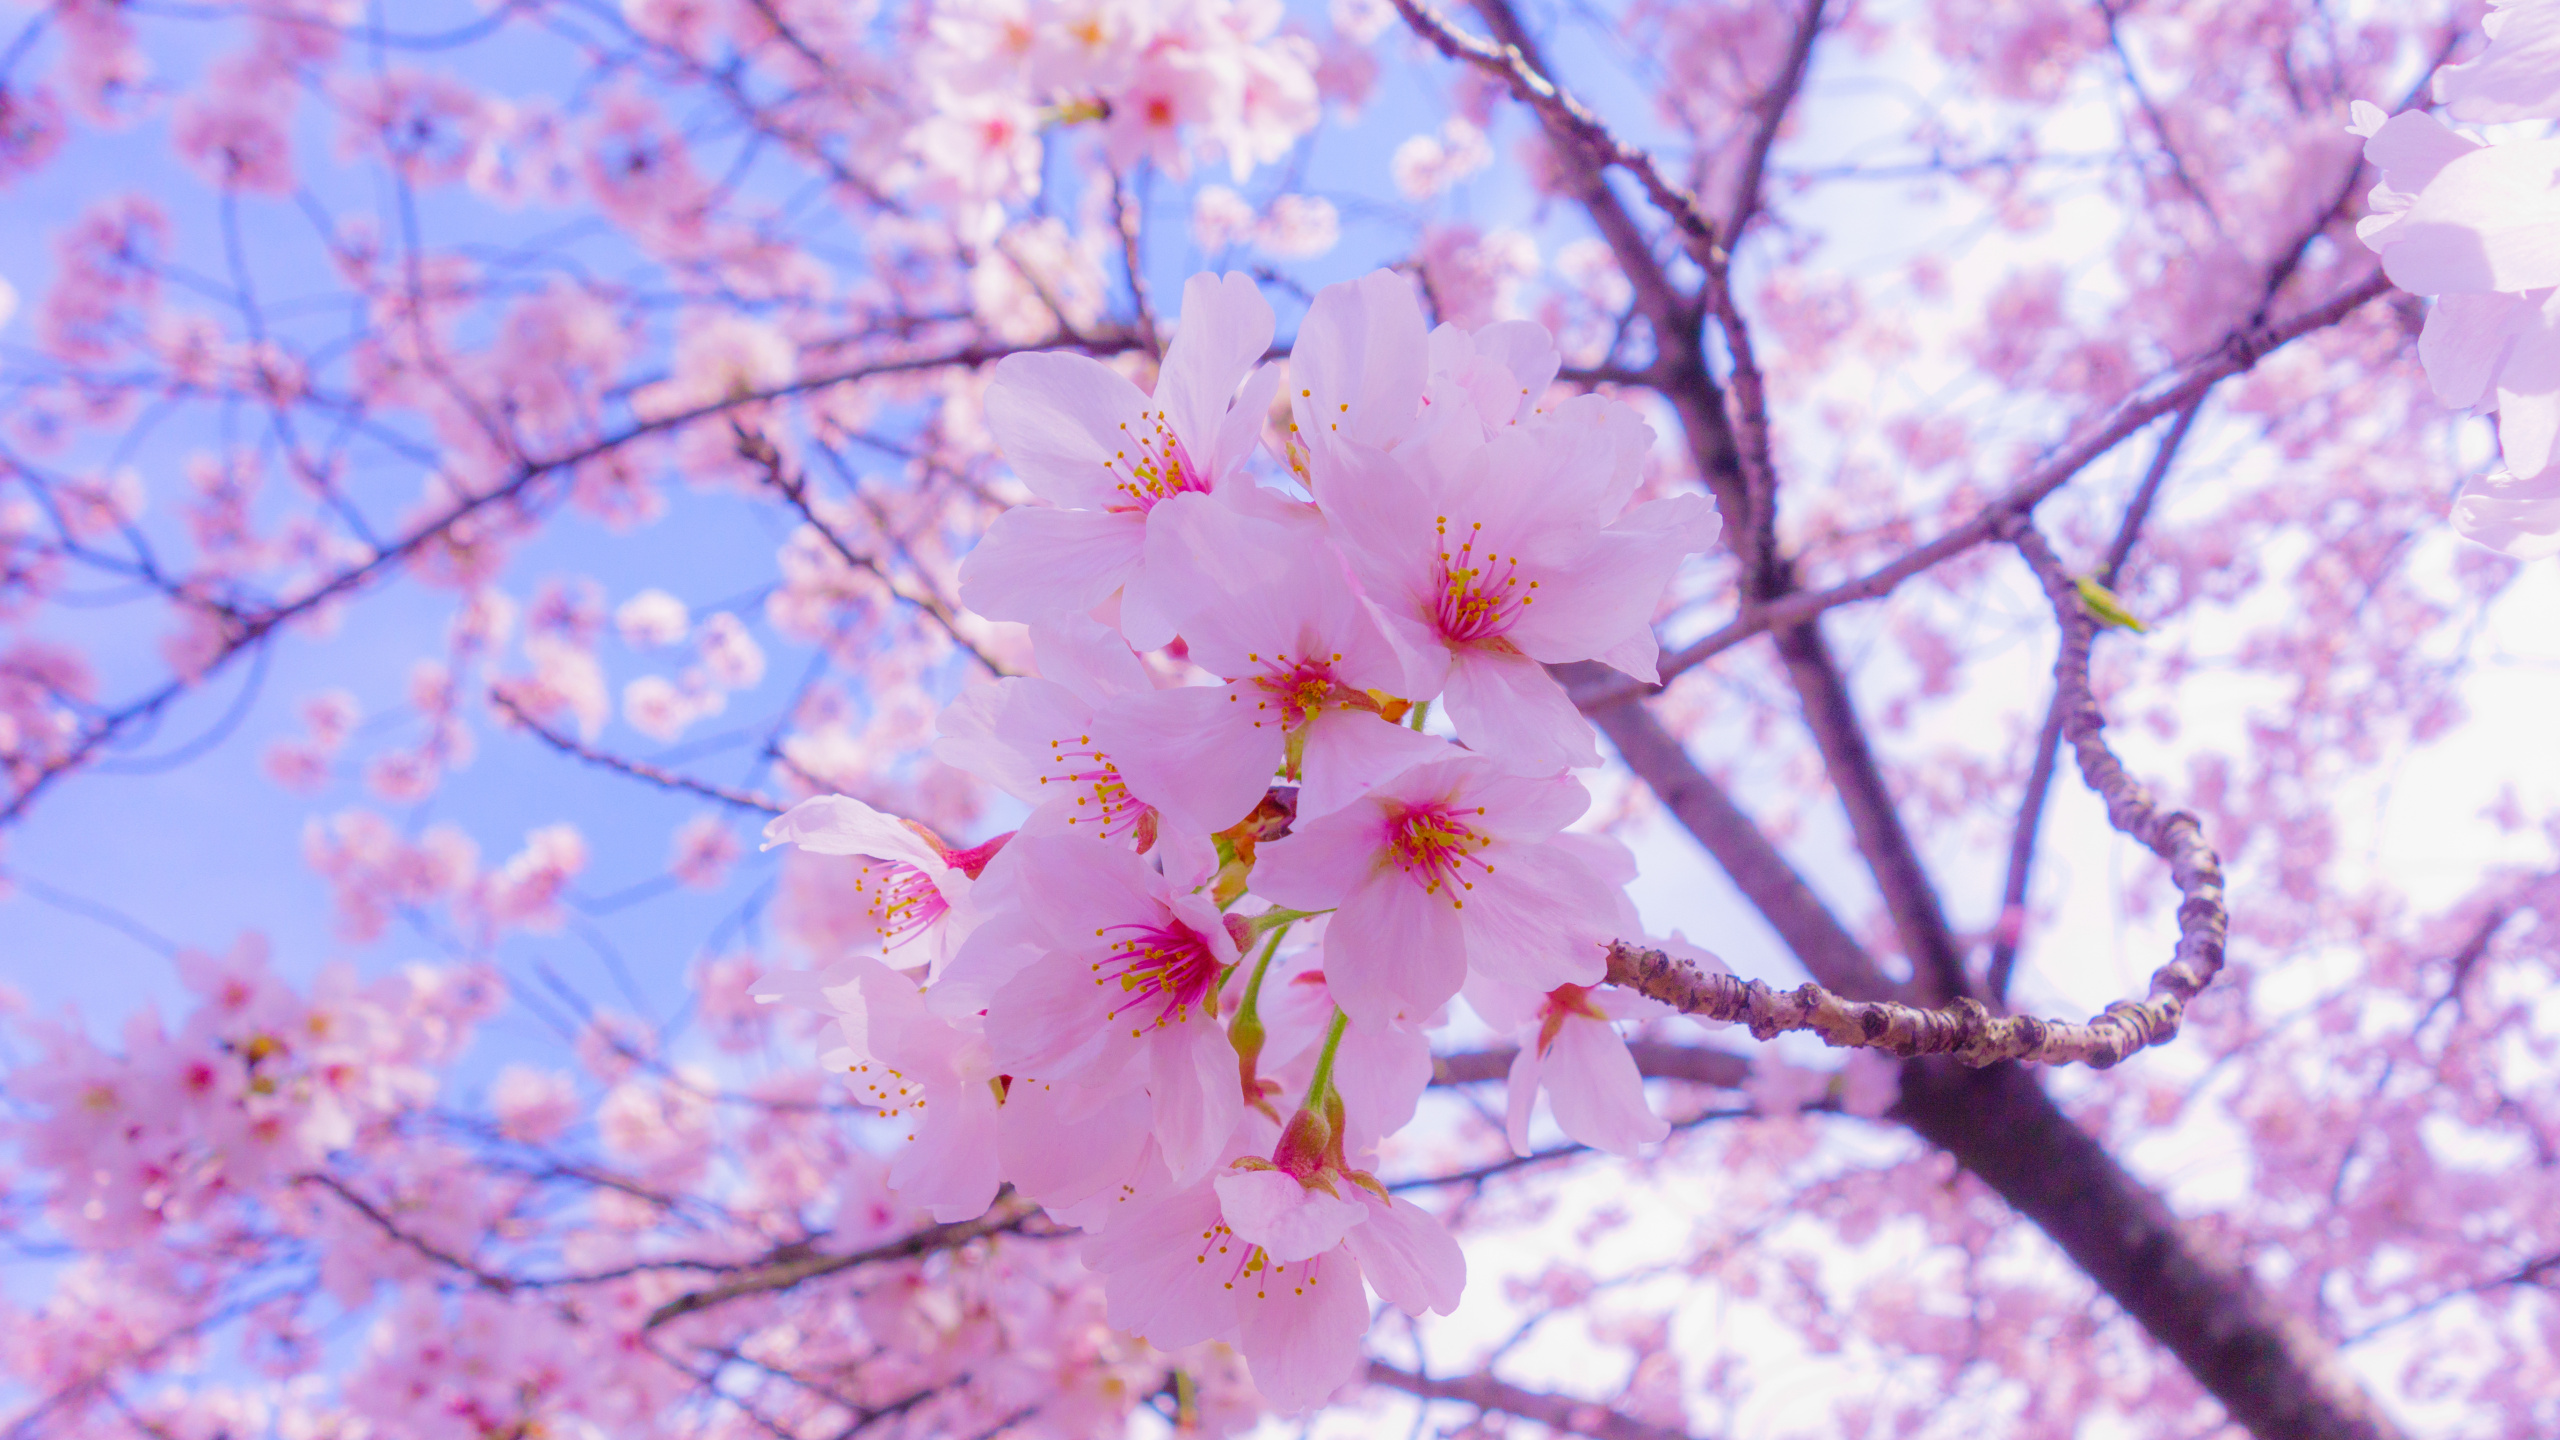 Pink Cherry Blossom Tree During Daytime. Wallpaper in 2560x1440 Resolution